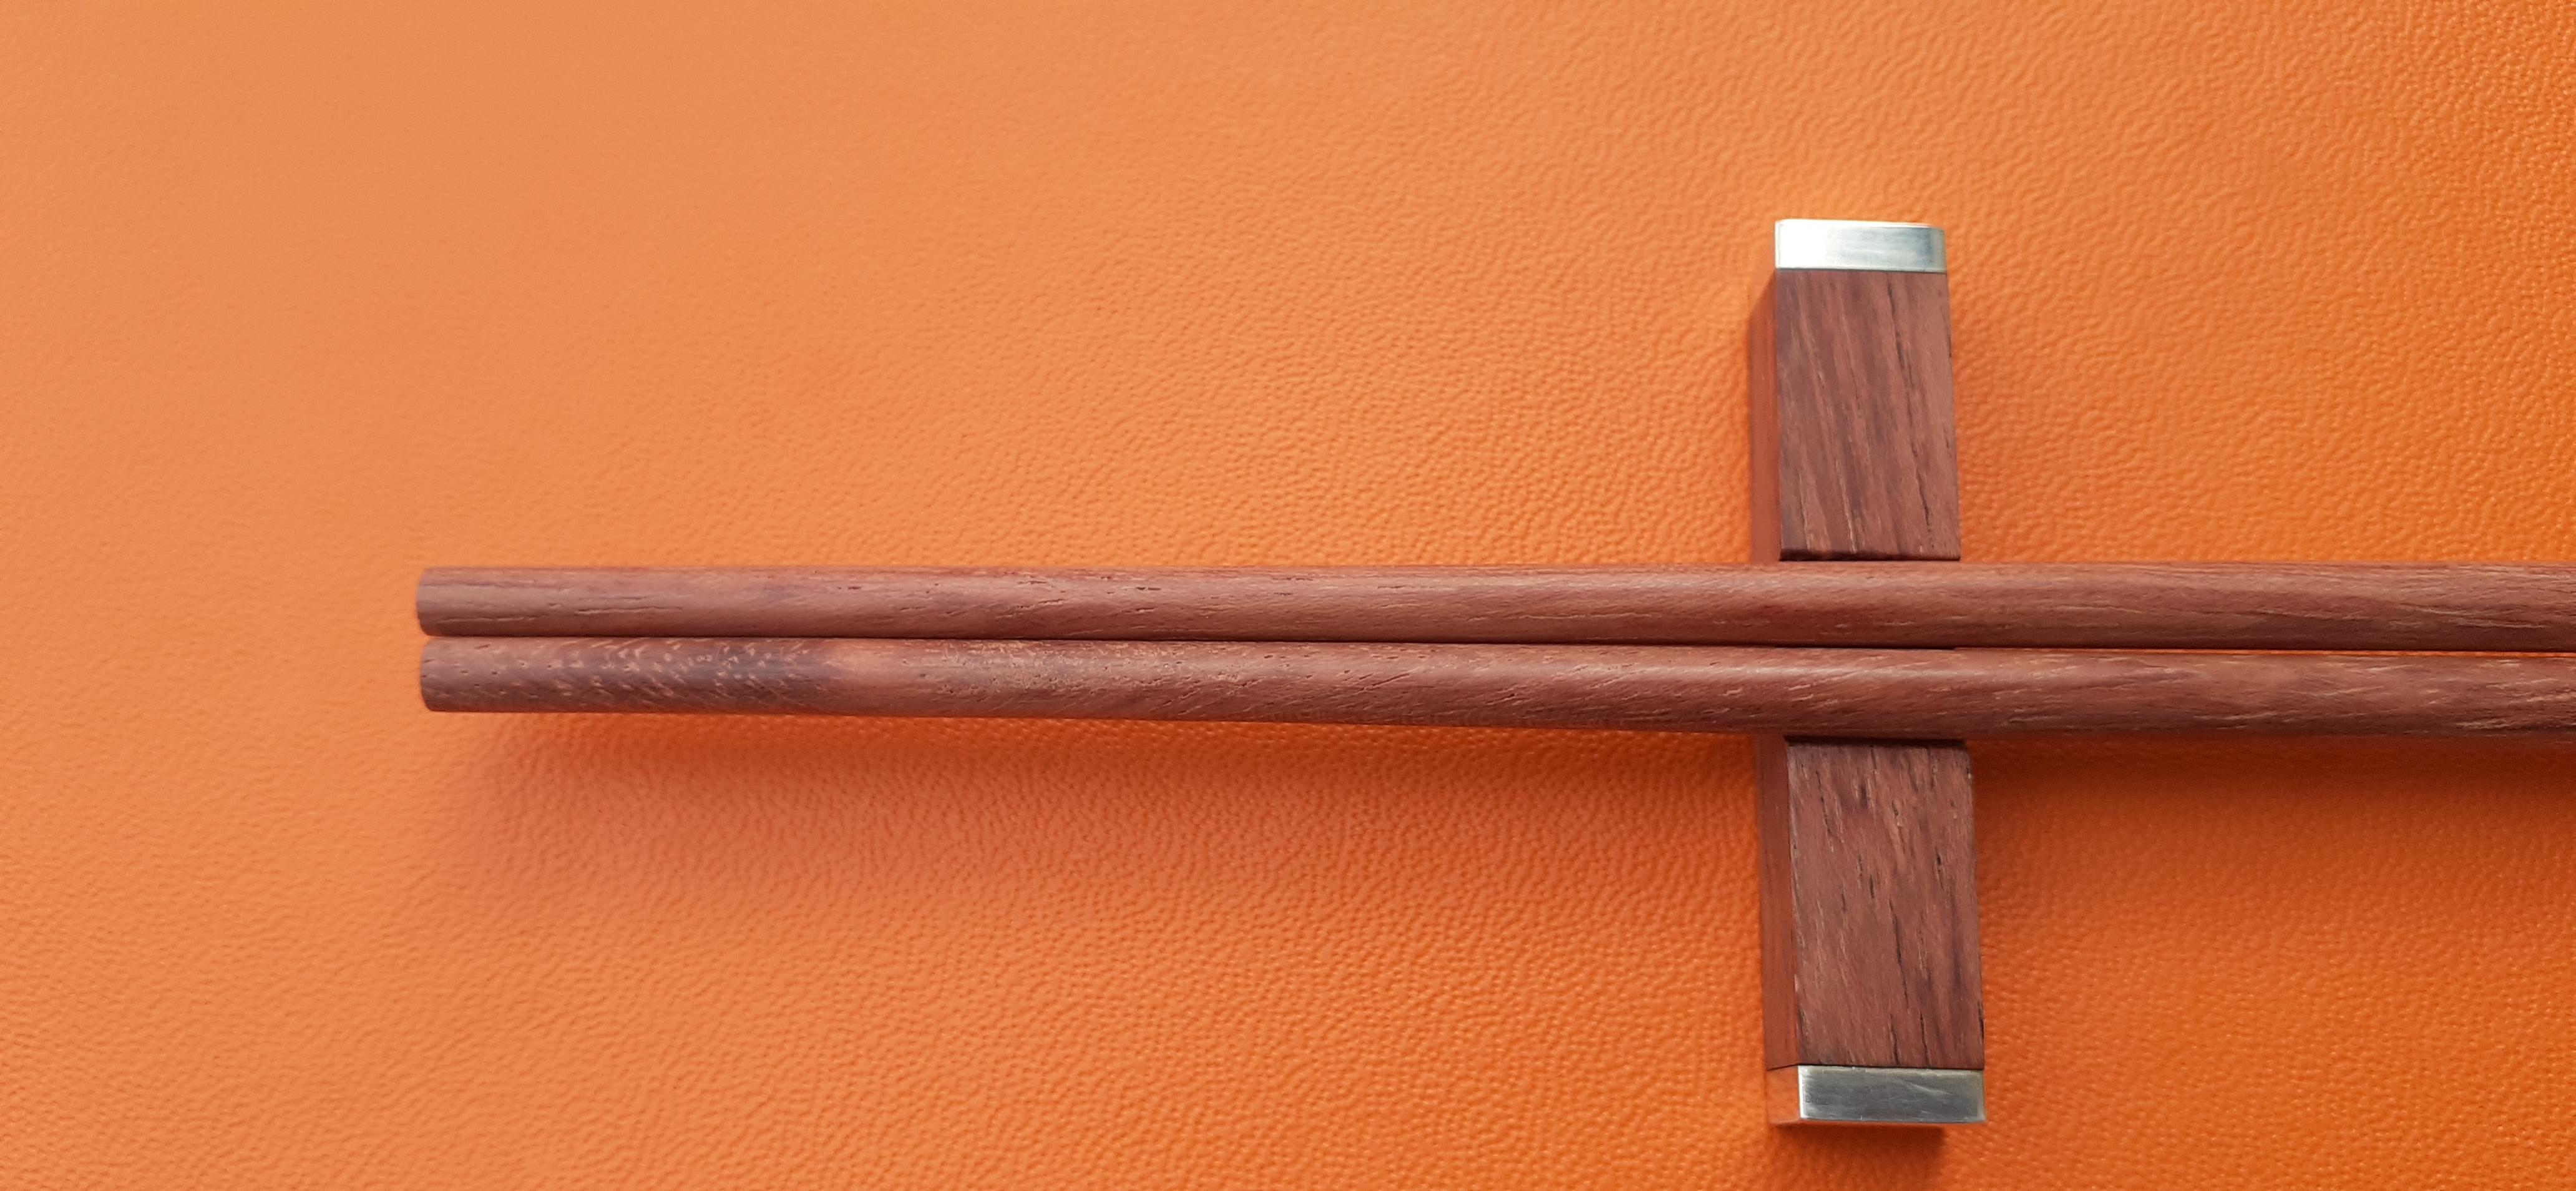 Exceptional Hermès Set of 2 pairs of Chopsticks in wood For Sale 6